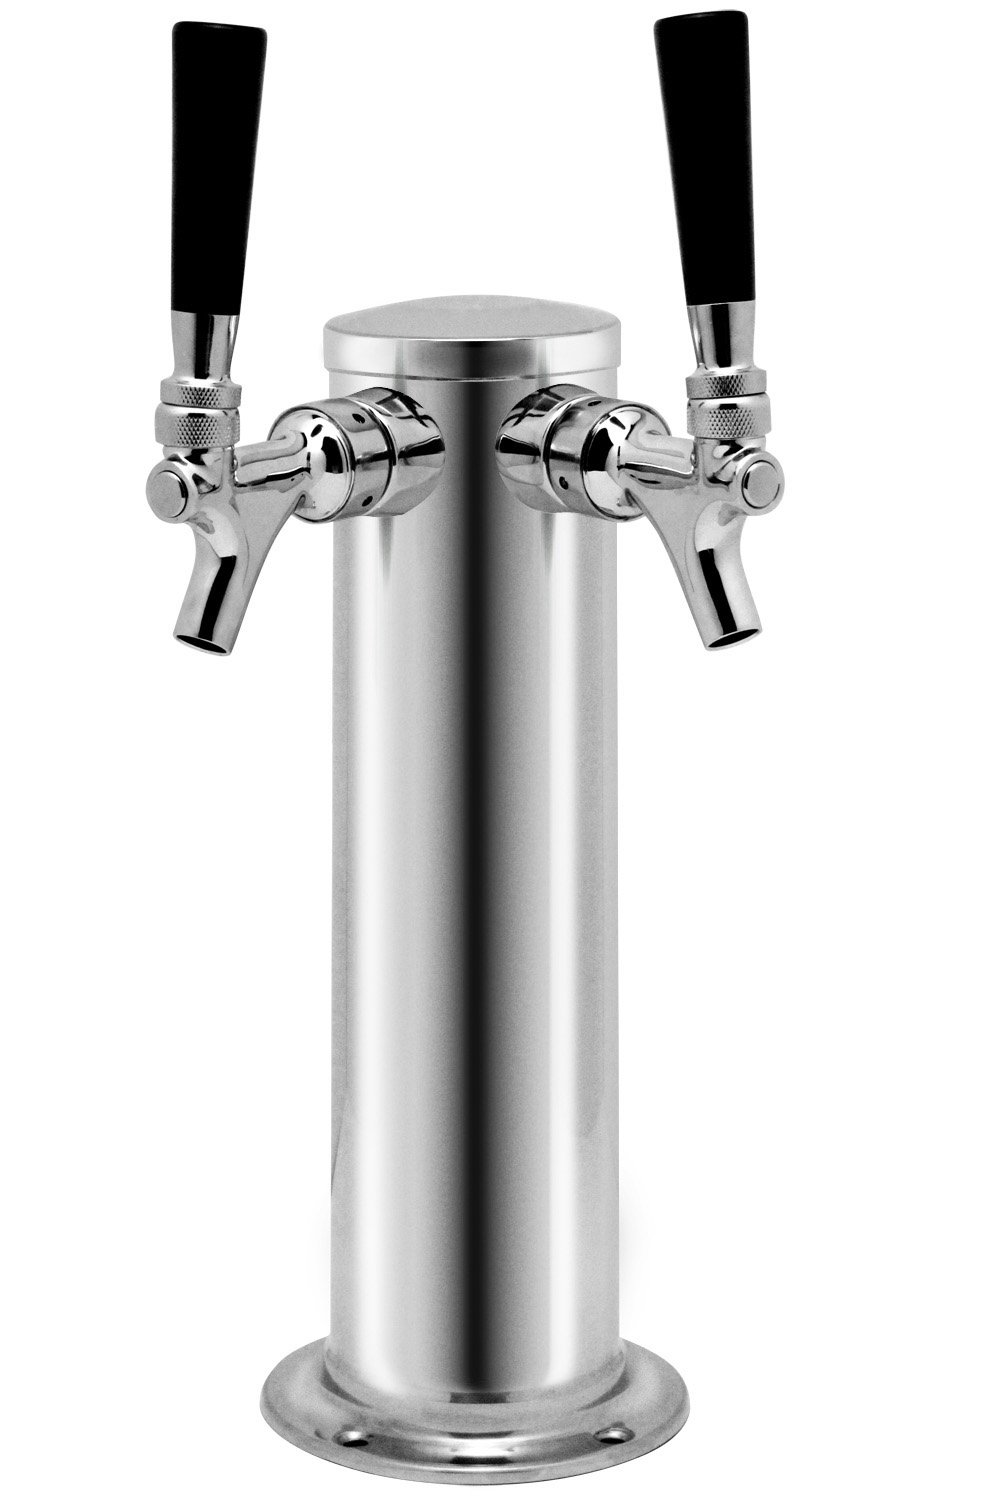 Kegco BF 2STCK-5T Conversion Kit, 2 Faucet with Tank, Standard